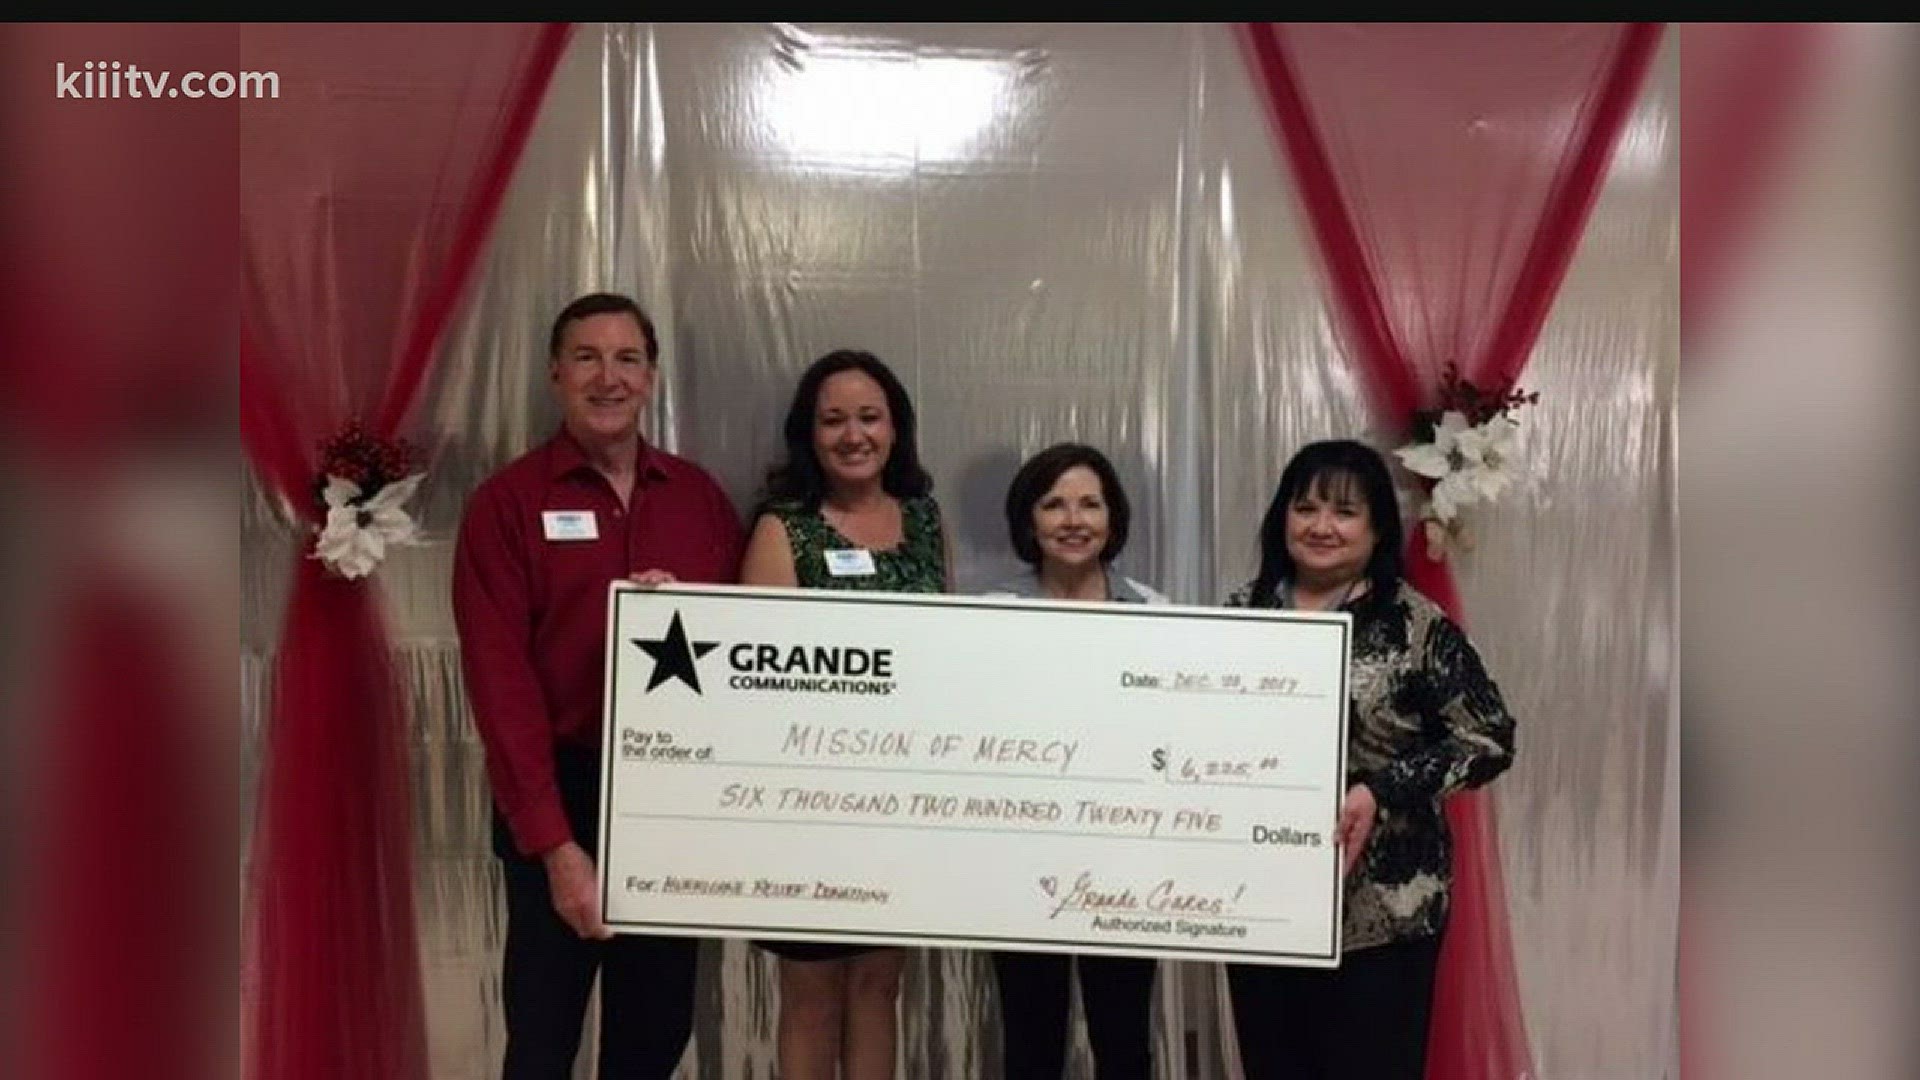 Grande Communications made a donation of over $6,000 to local non-profits to help victims of Hurricane Harvey.